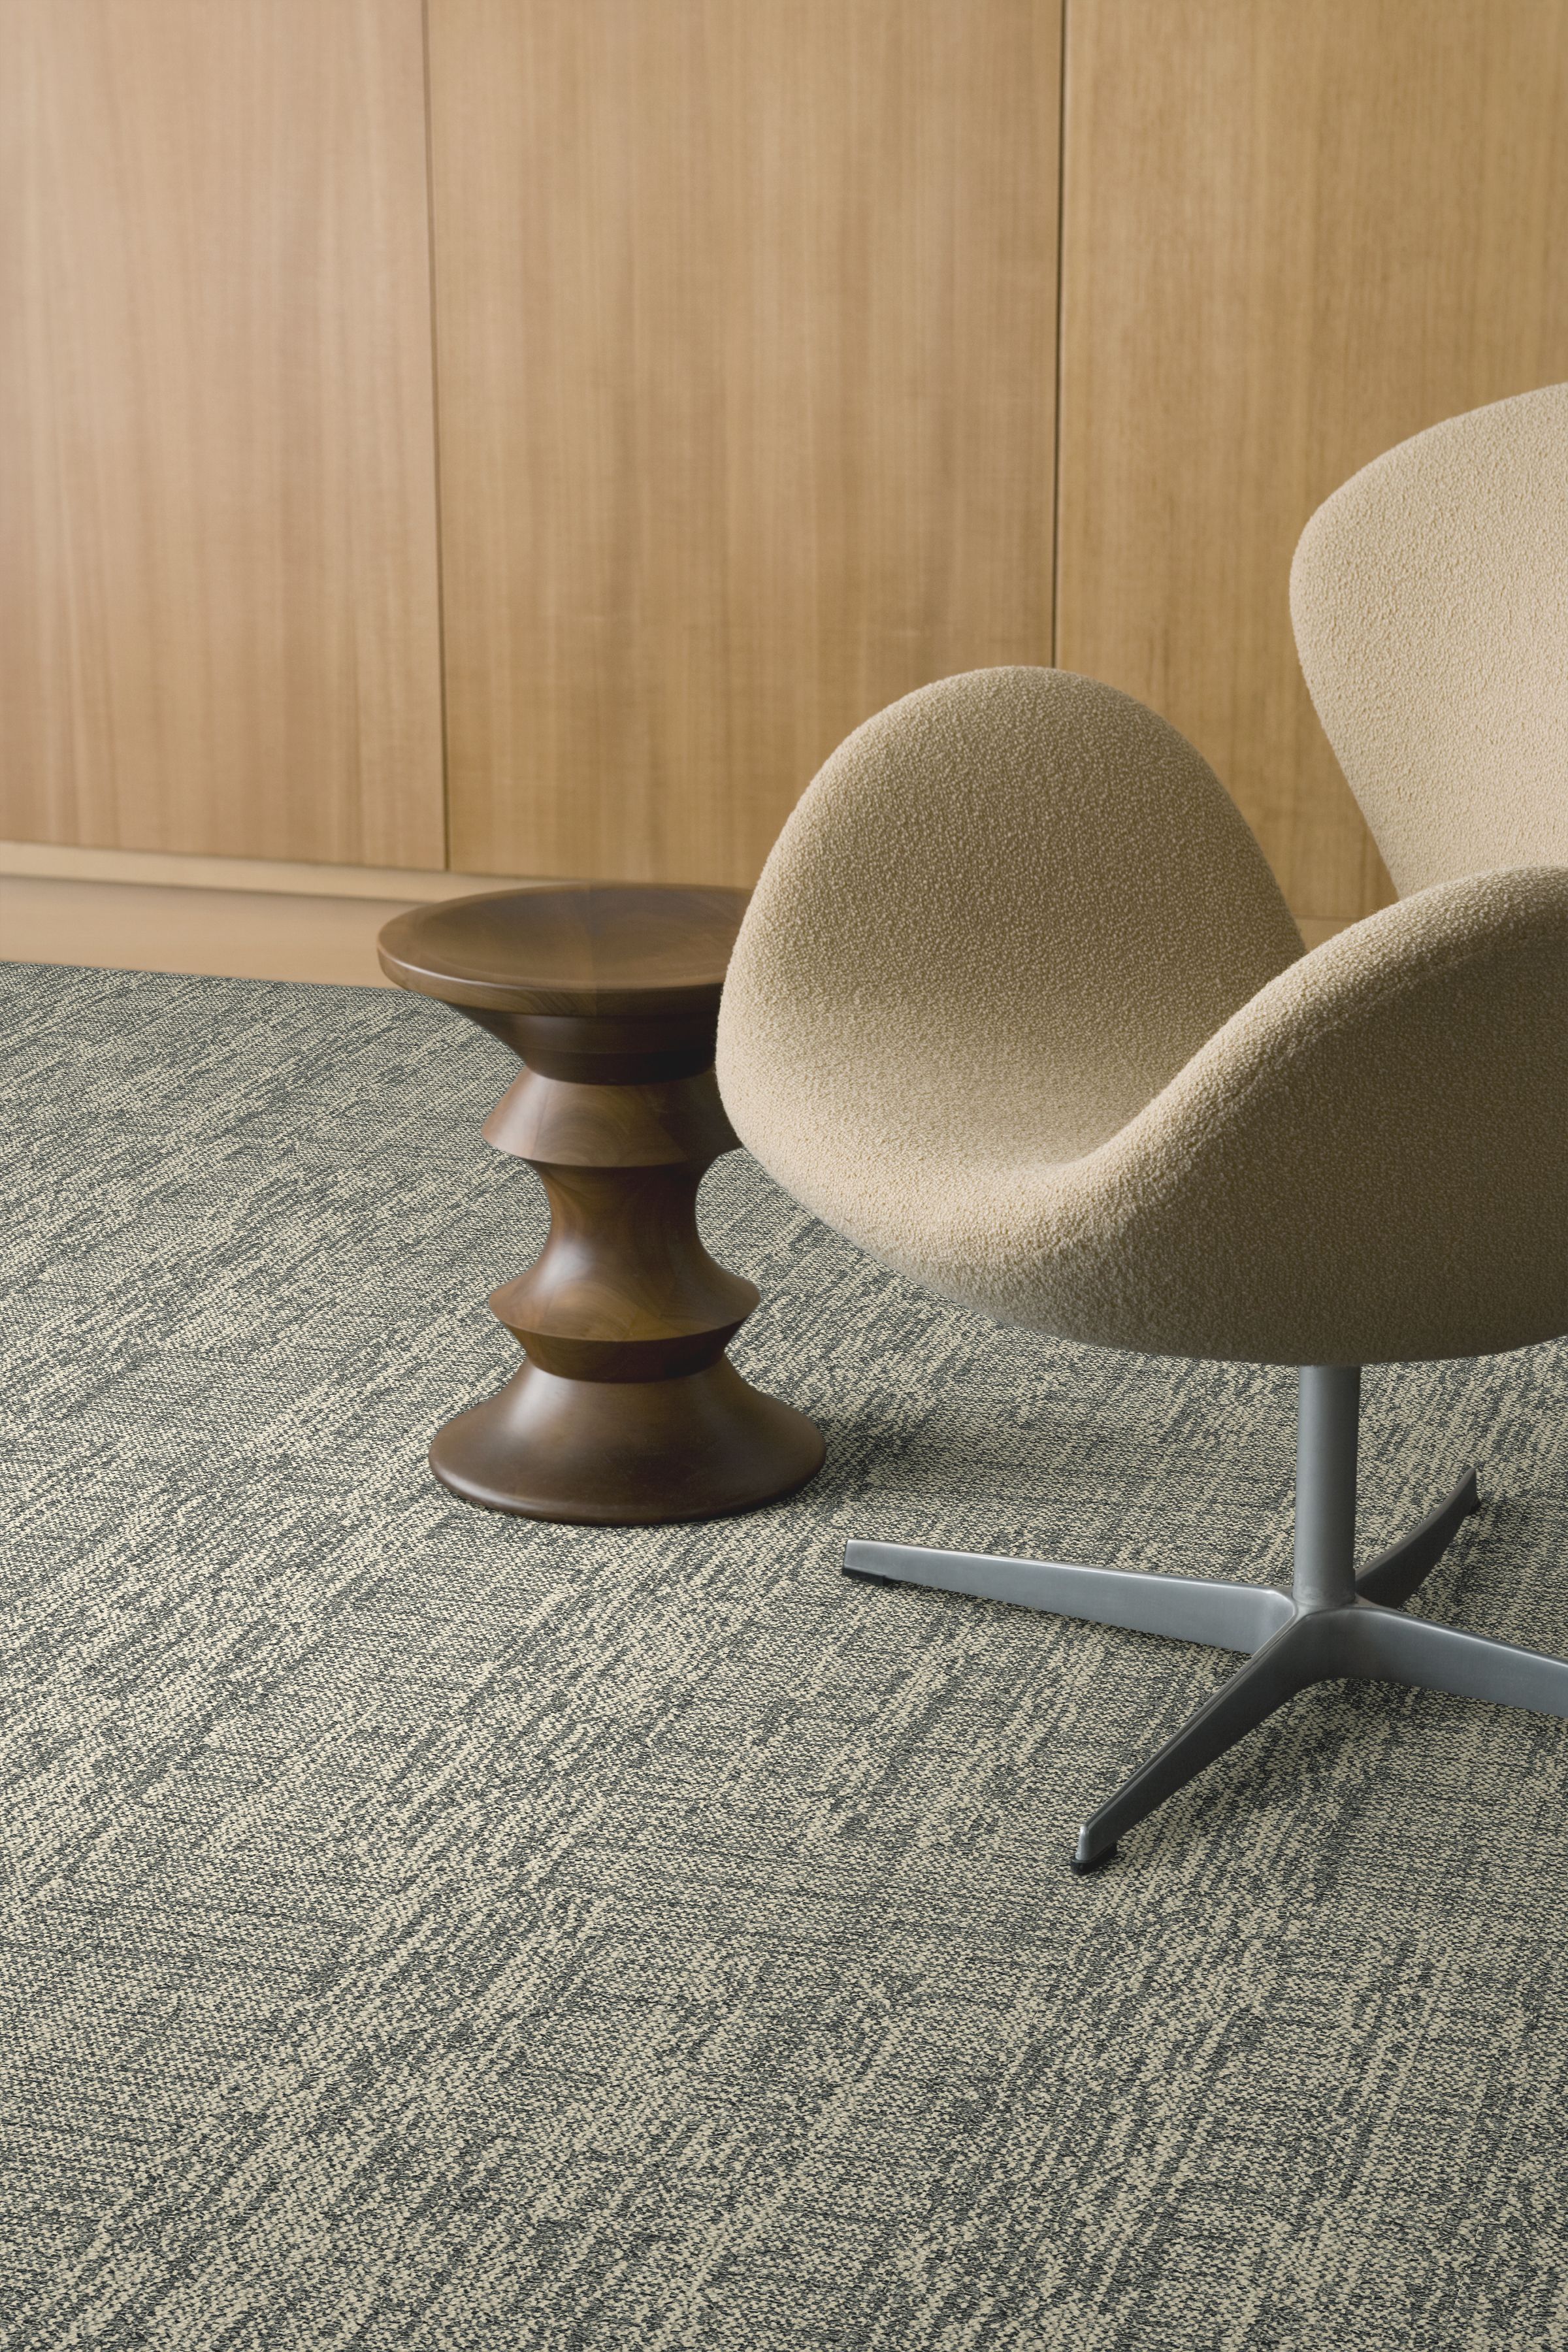 Interface Intermedio plank carpet tile in meeting room with four chairs and table numéro d’image 2